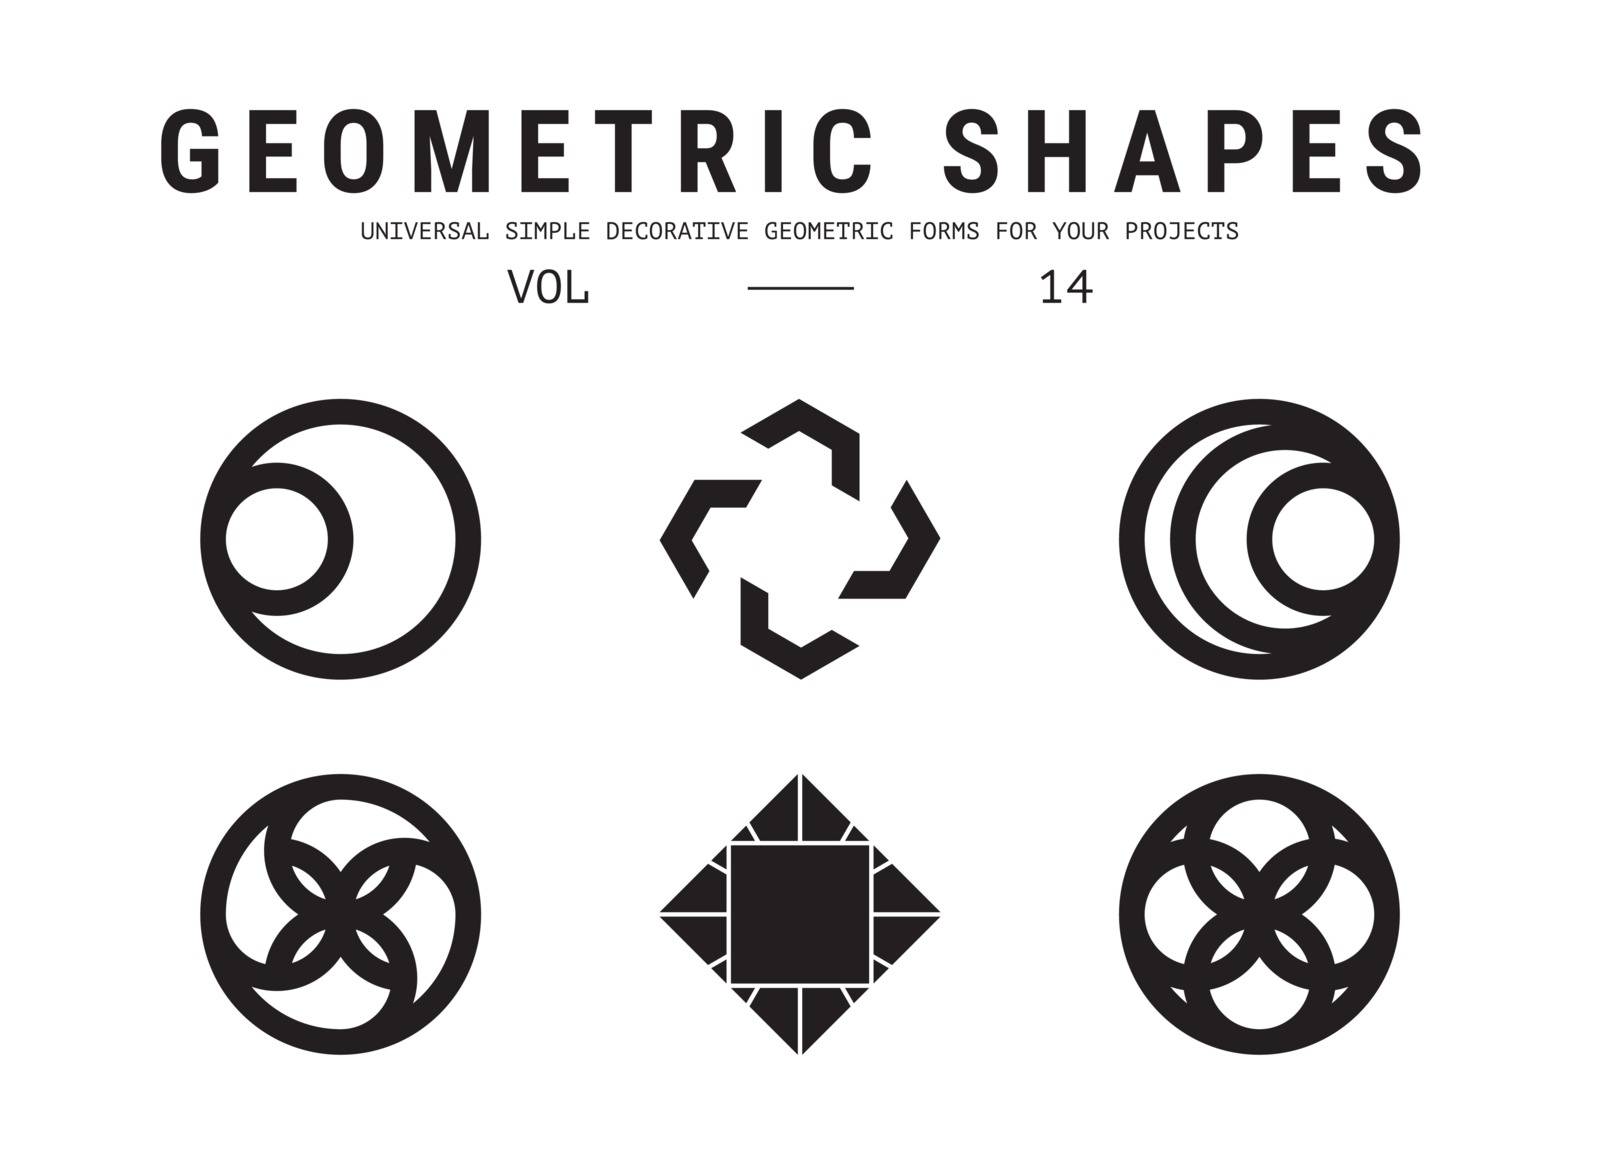 Geometric shapes set. Universal simple decorative forms for your projects. Minimal logo design